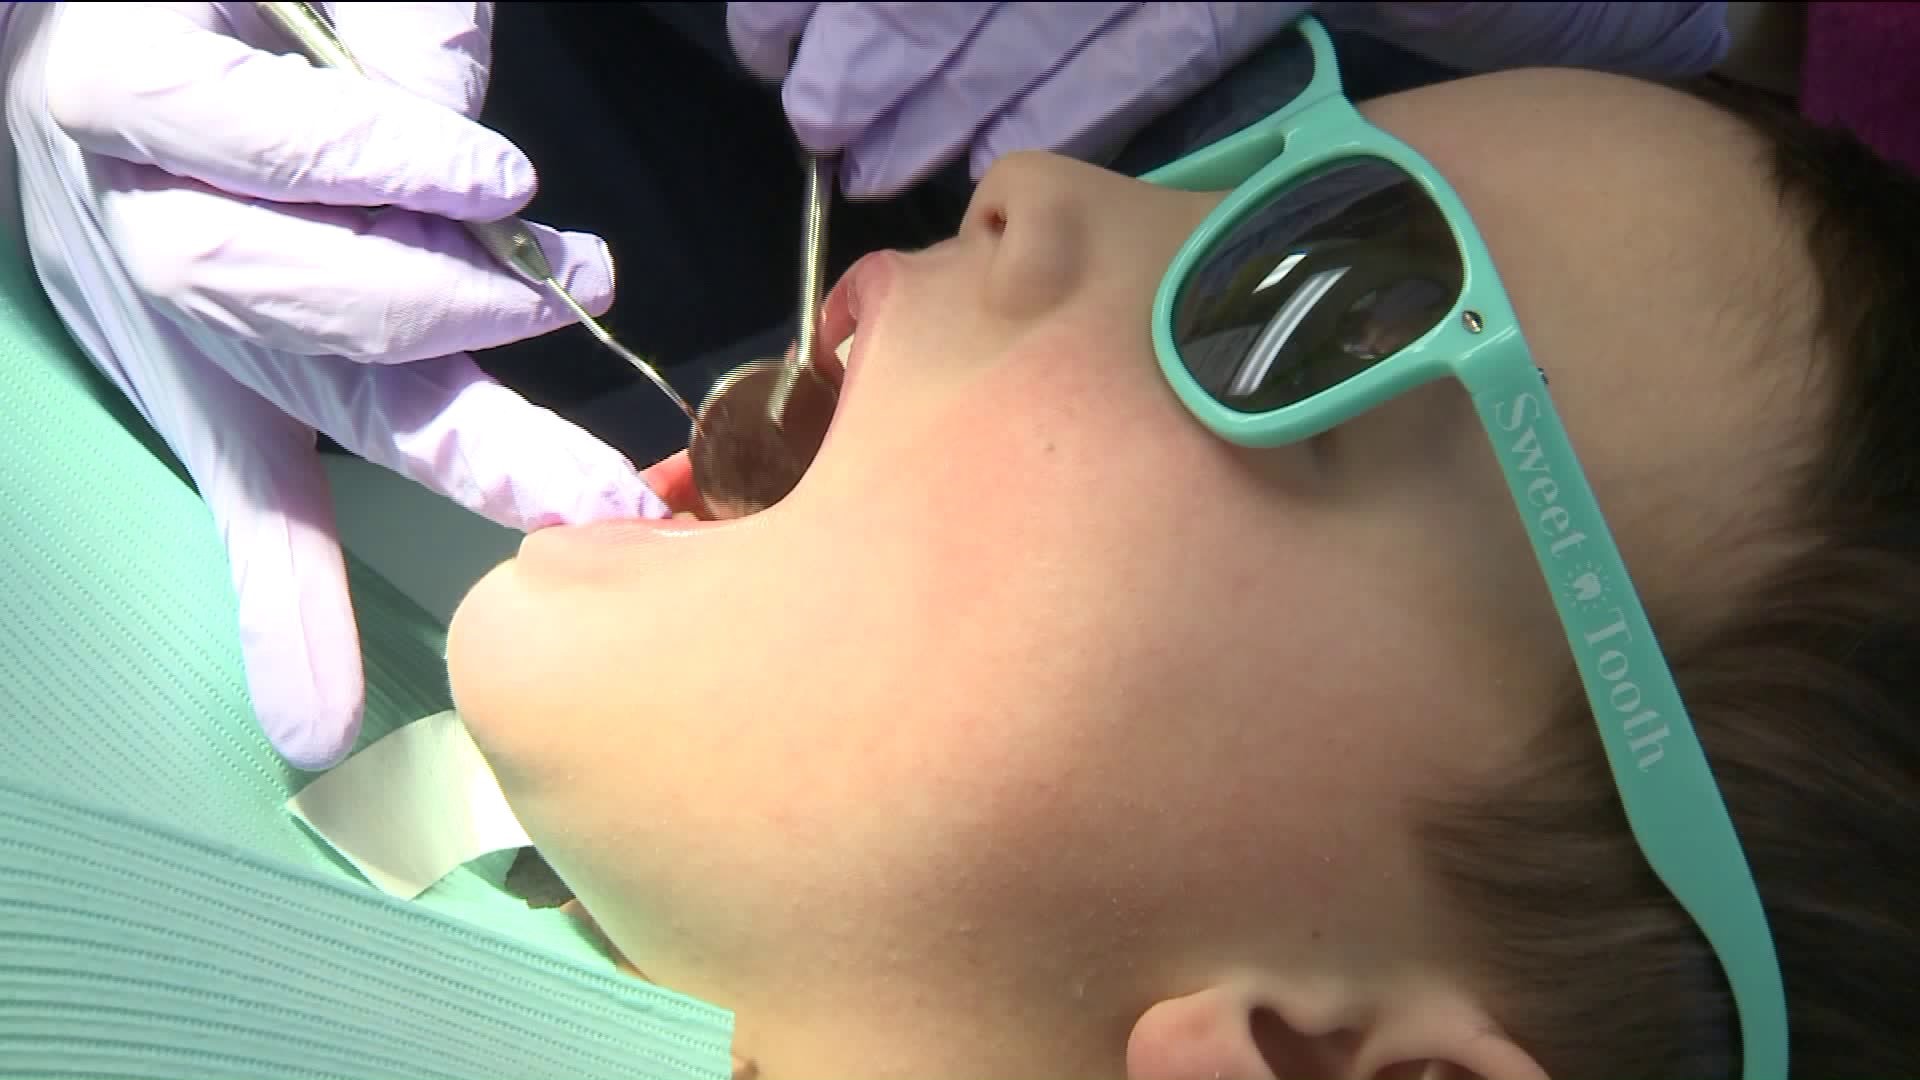 Family First - Kids and the dentist